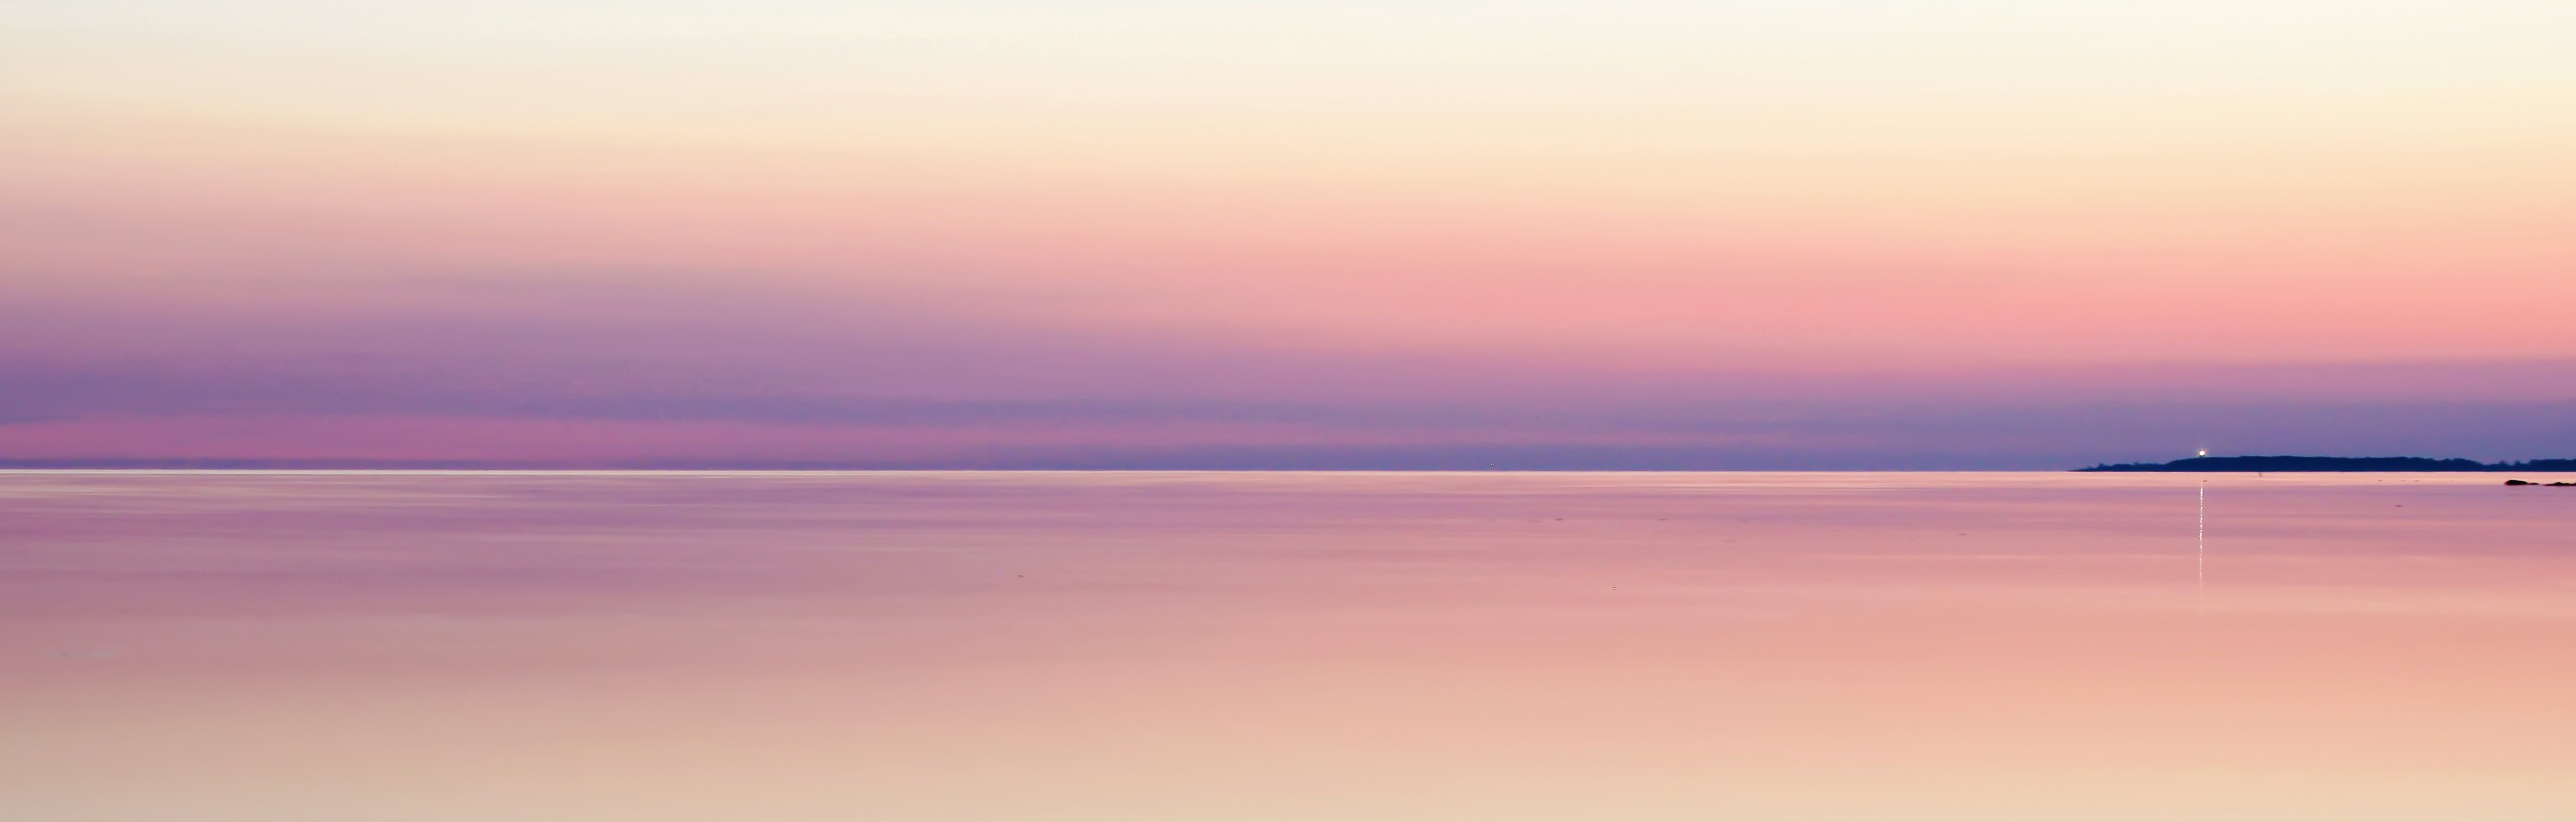 A landscape image of purple/pink sky and water.